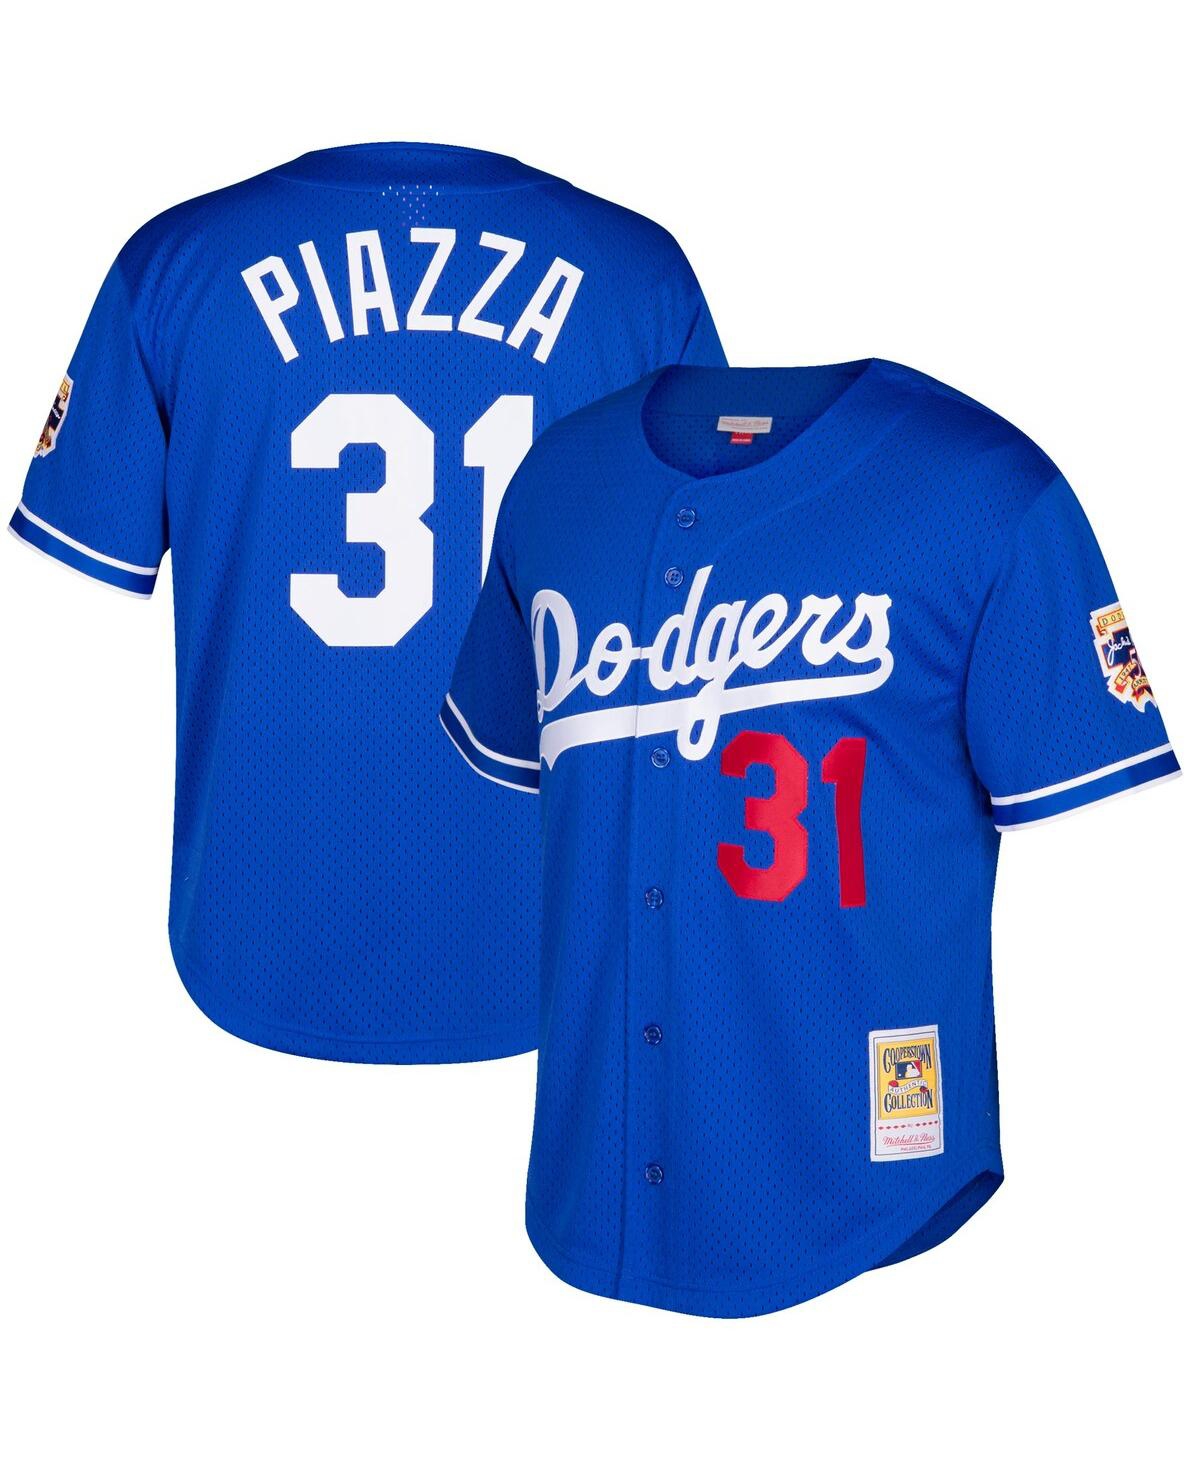 Men's Mitchell & Ness Mike Piazza Royal Los Angeles Dodgers Cooperstown Collection Mesh Batting Practice Button-Up Jersey - Royal